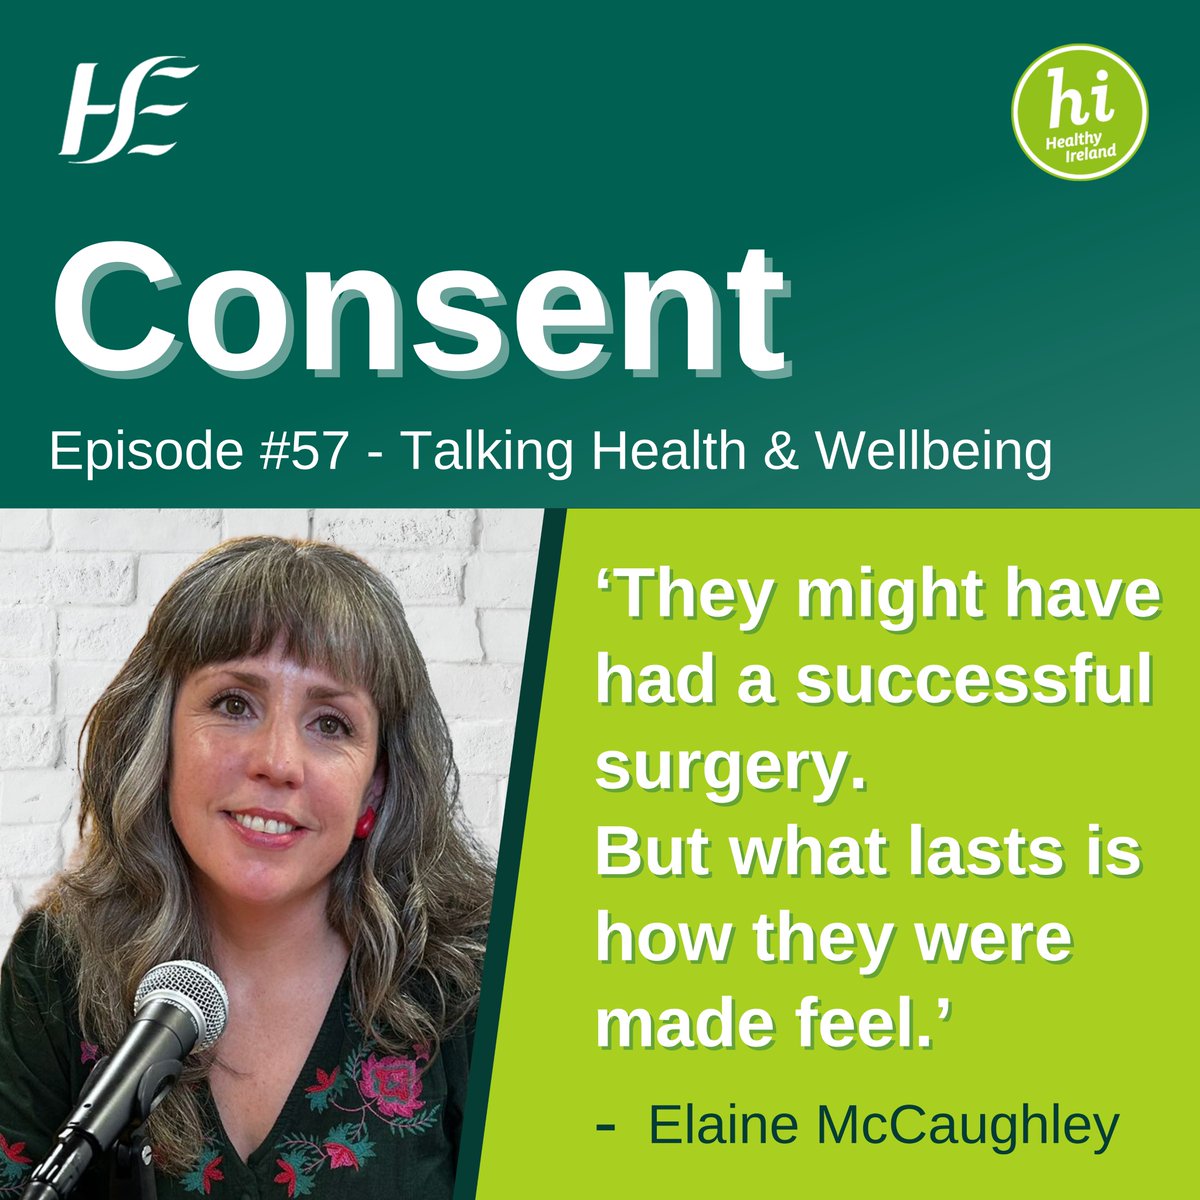 In episode 57 of the HSE #TalkingHealthandWellbeing #Podcast we hear about the HSE’s National Consent Policy, highlighting the human rights-based approach to decision-making capacity. Listen here or wherever you get your podcasts: podbean.com/ew/pb-badsk-16… #Consent